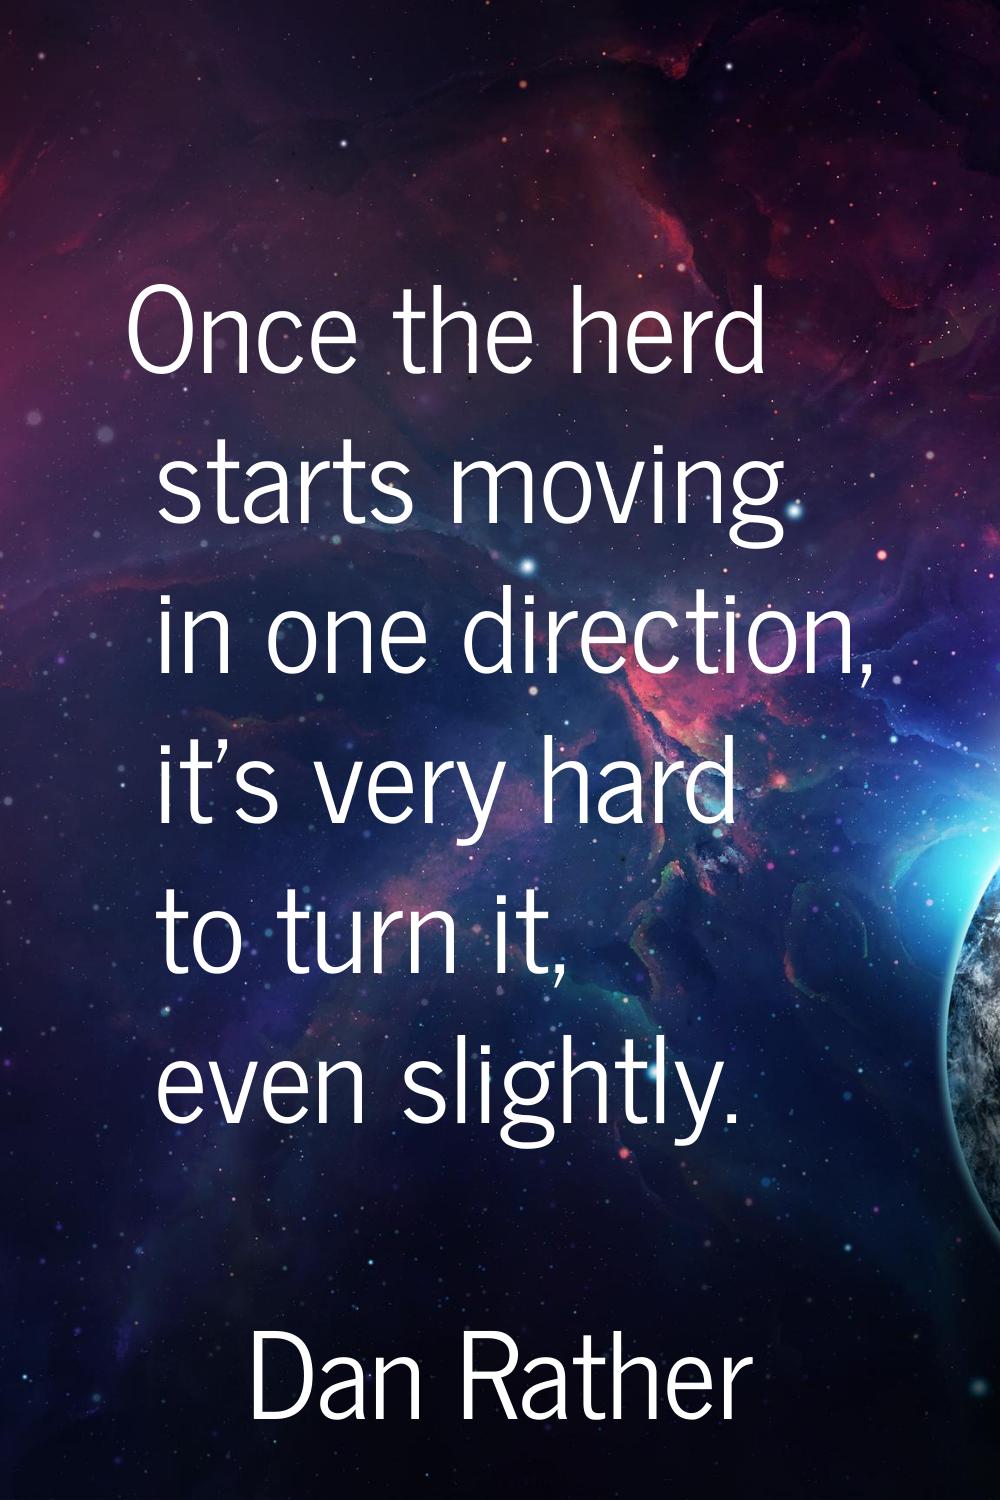 Once the herd starts moving in one direction, it's very hard to turn it, even slightly.